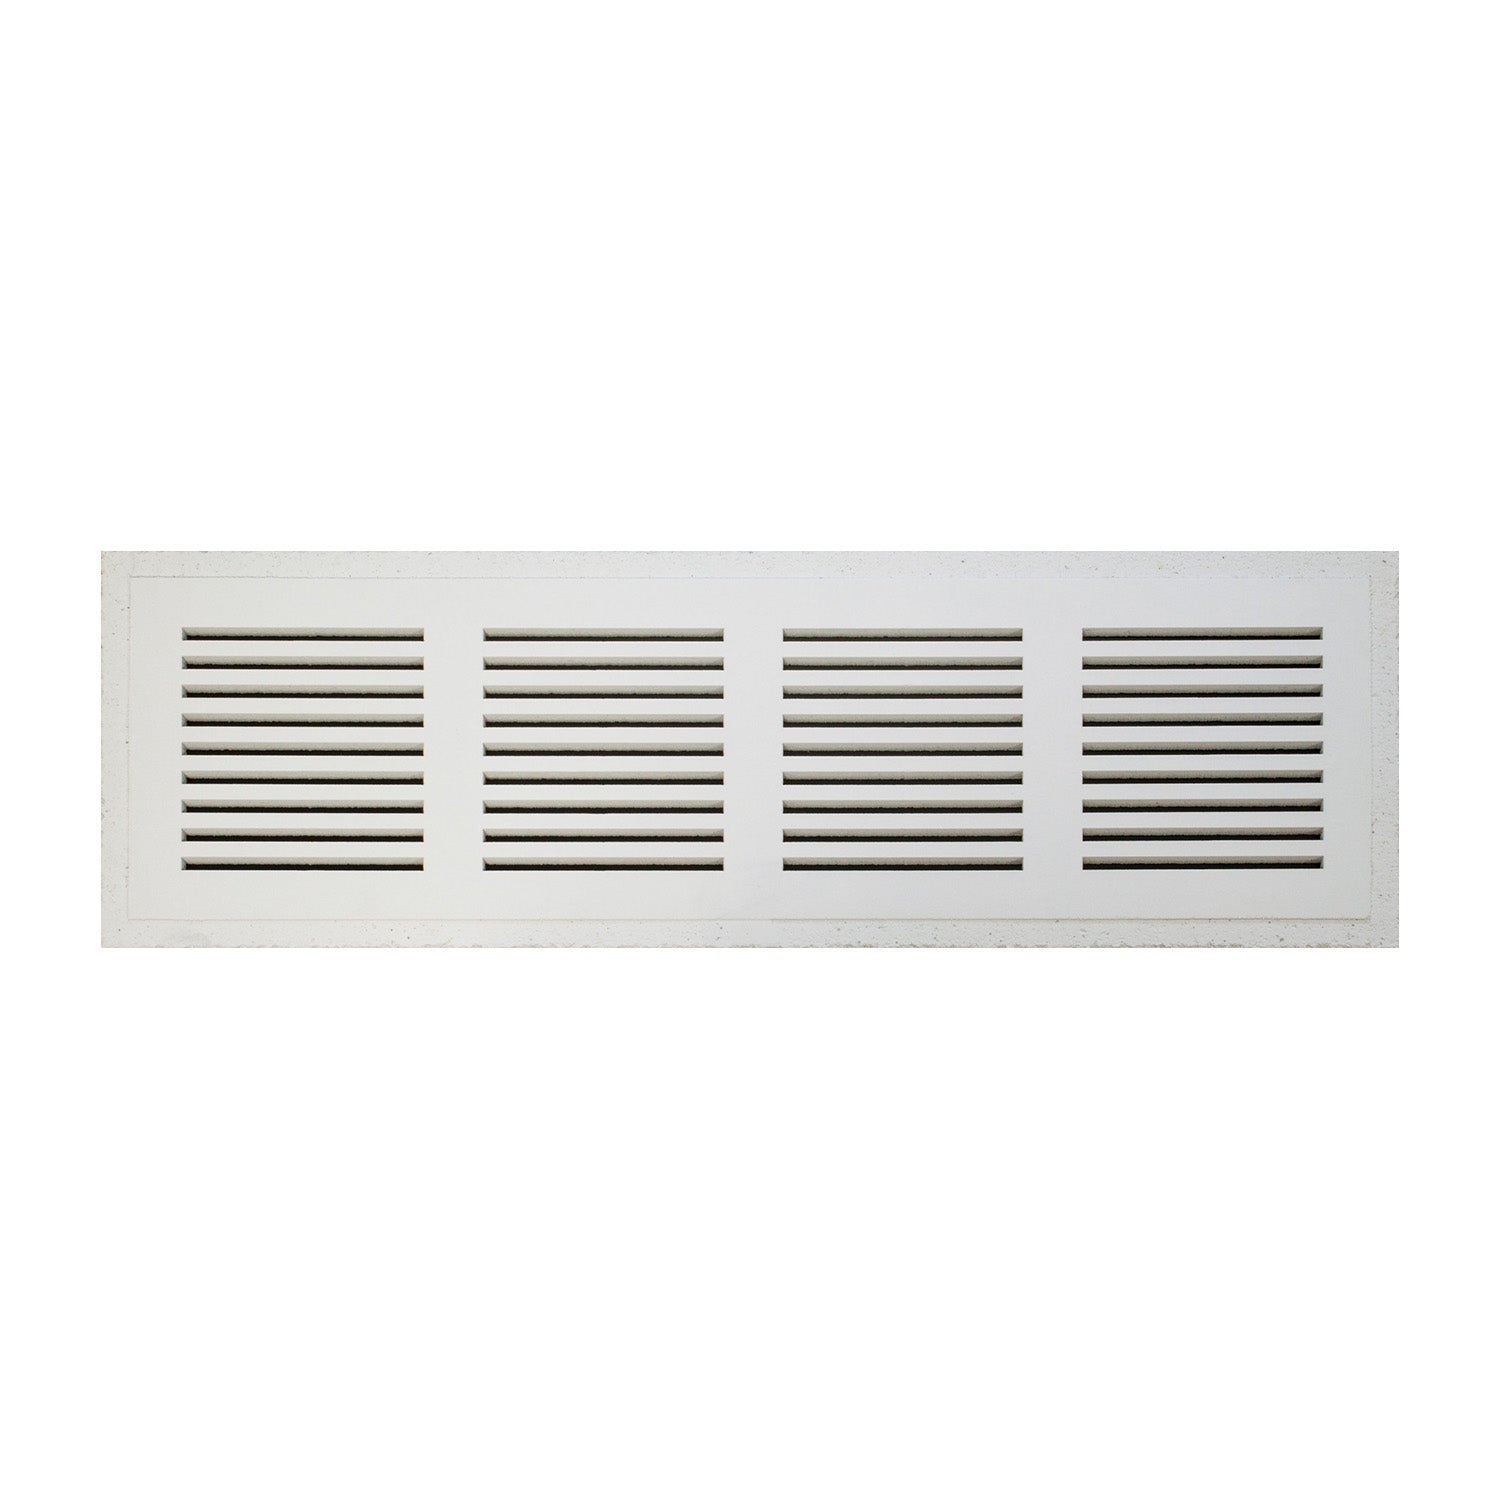 ENVISIVENT (CB5001) – Permanent Mud-In Flush Mounted Wall Air Return, 30” x 8” Duct